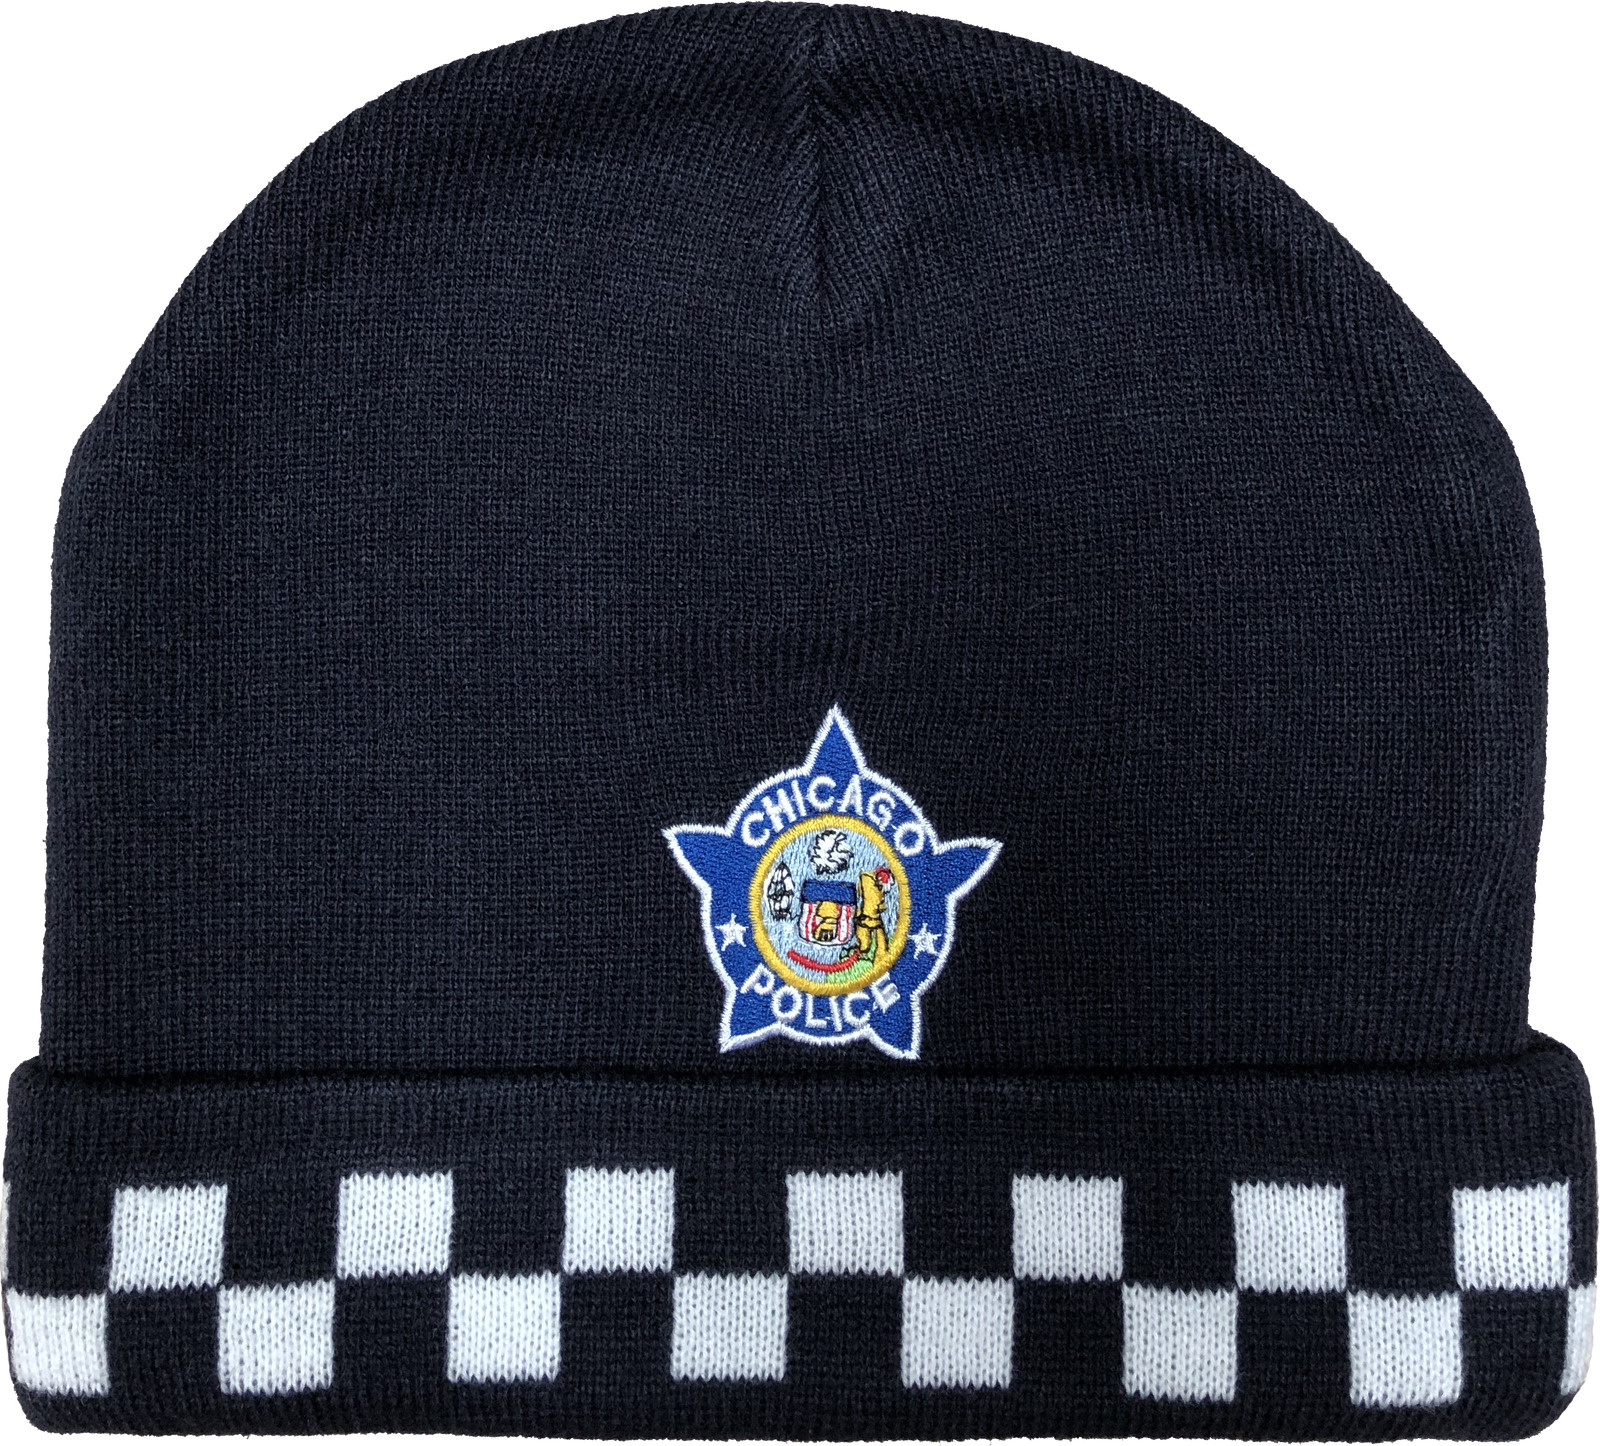 CHICAGO POLICE WINTER SKULL CAP WITH CUFF - Police Officer With Cuff